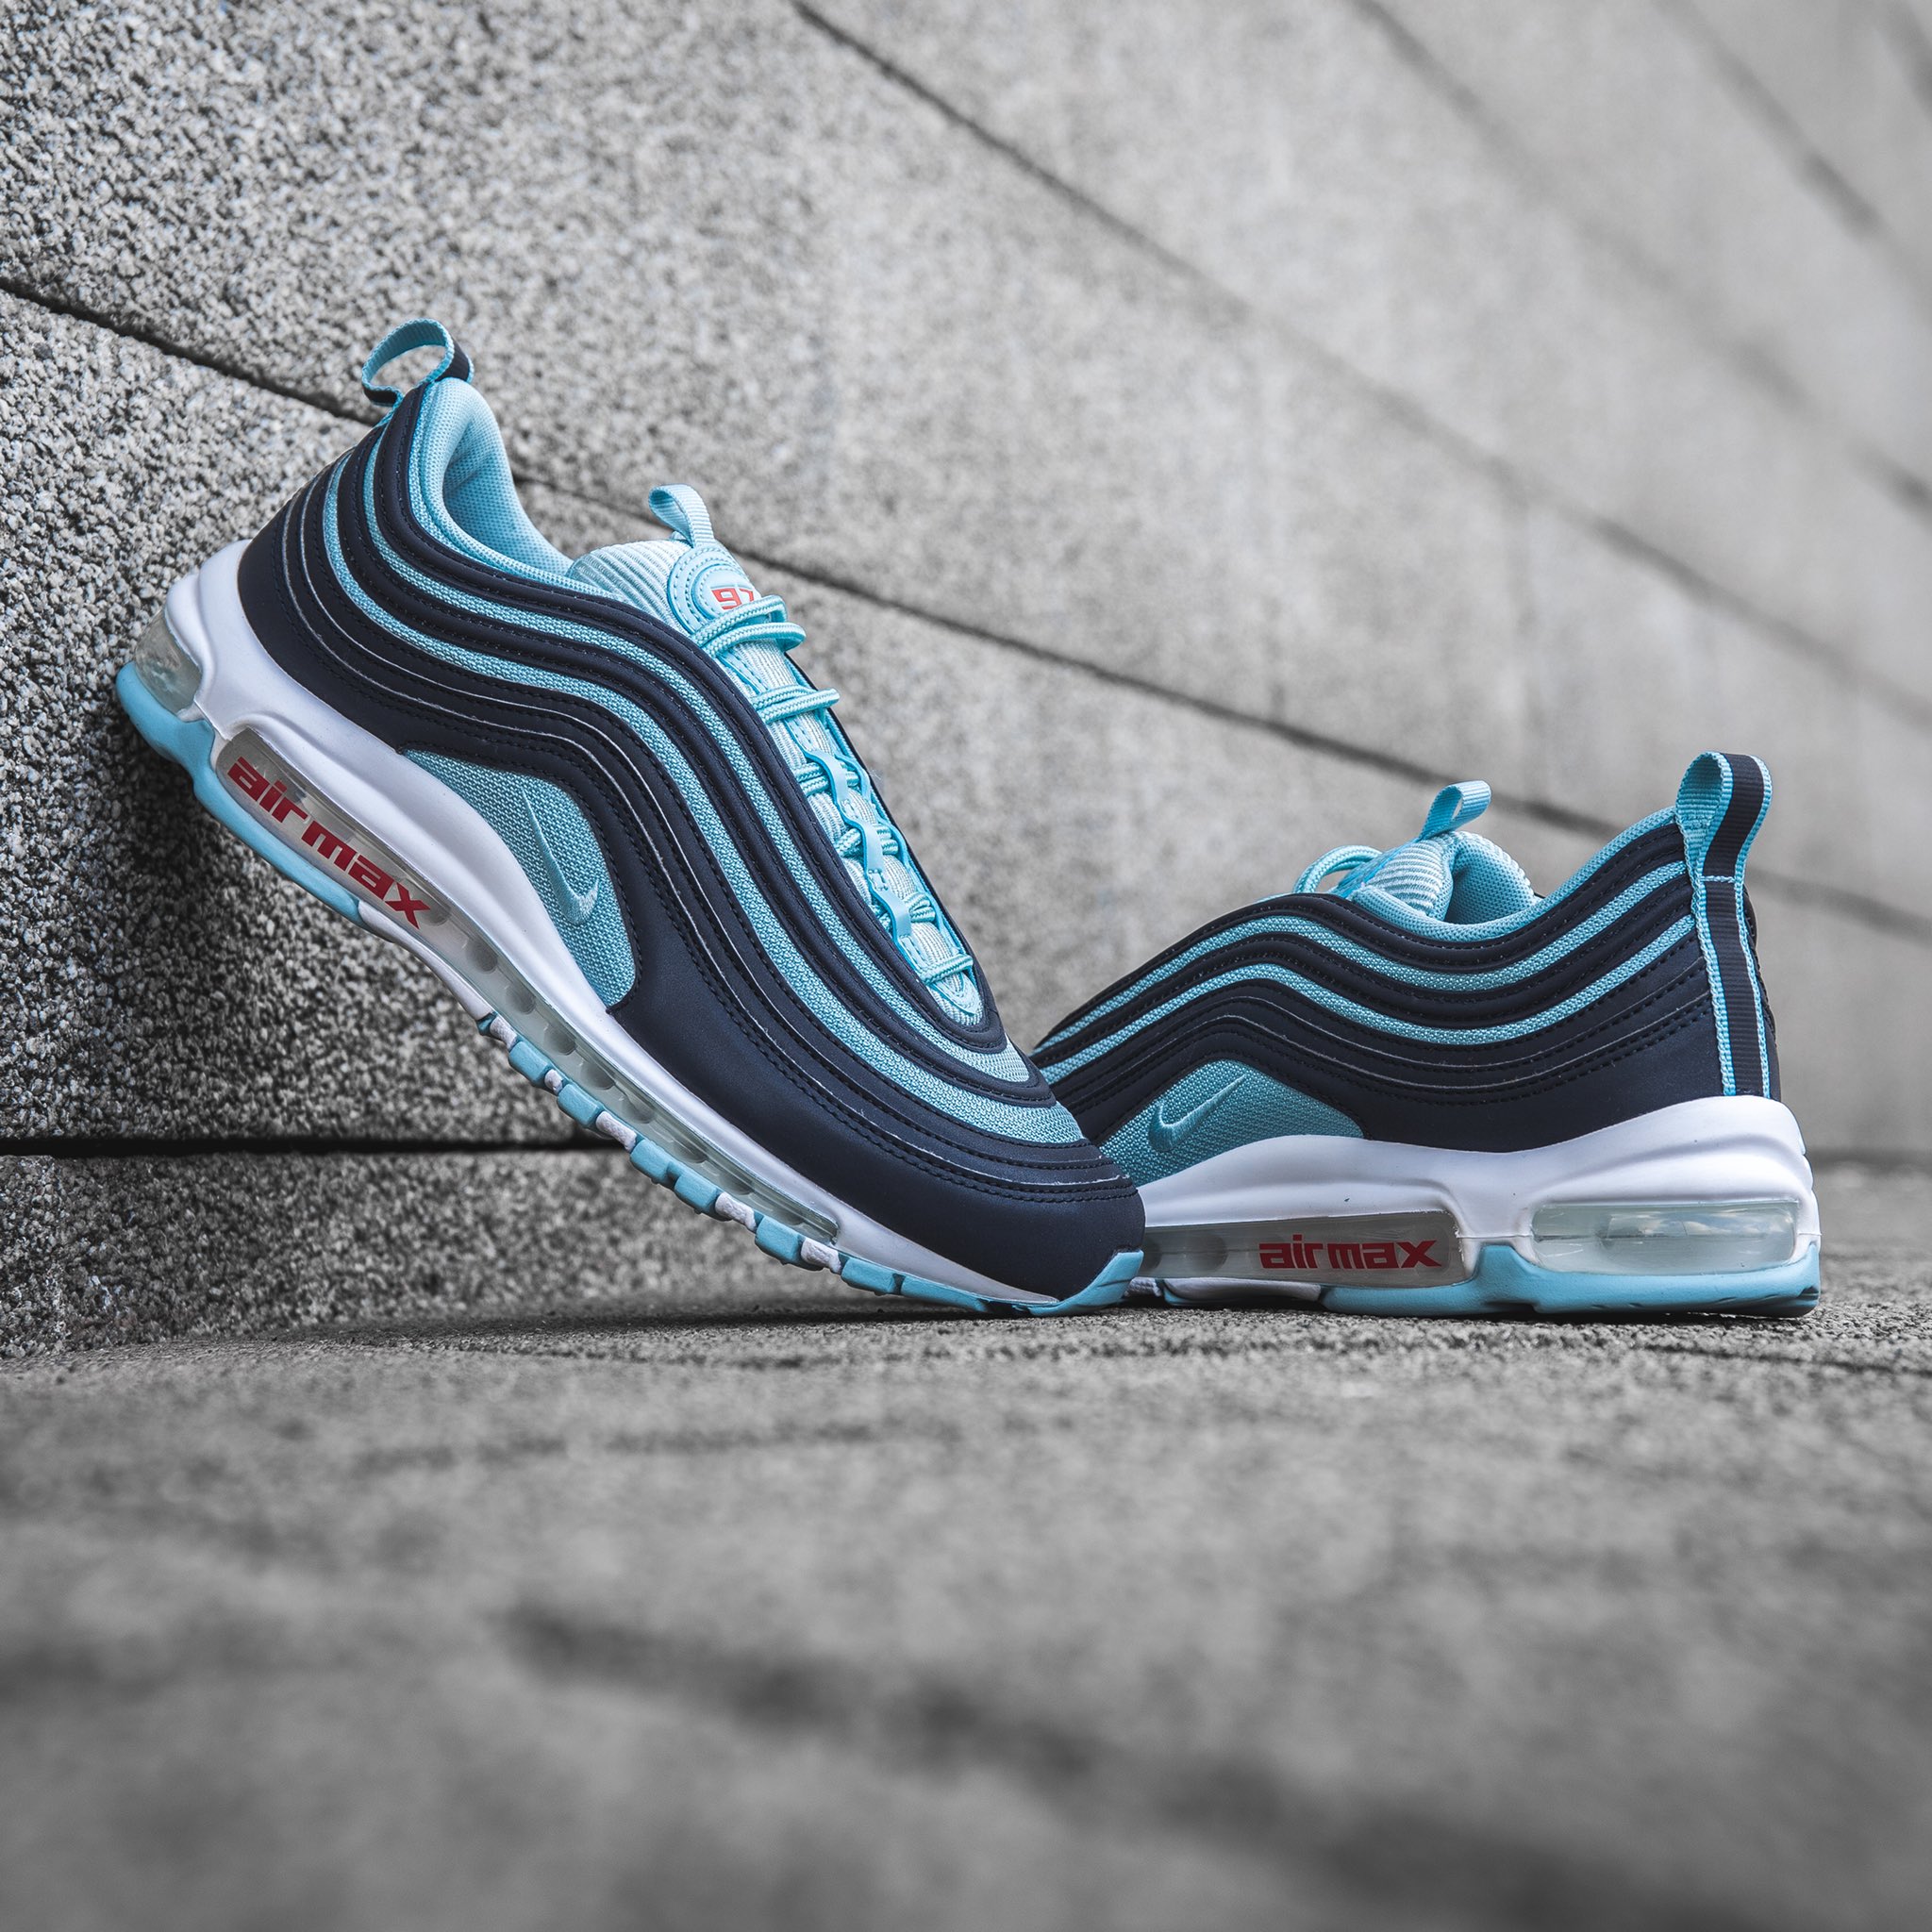 wellgosh on Twitter: "The Nike Air Max 97 coloured up in a fresh Obsidian colourway donning ice cold teal mesh underlays a contrast Air Max sign off on the